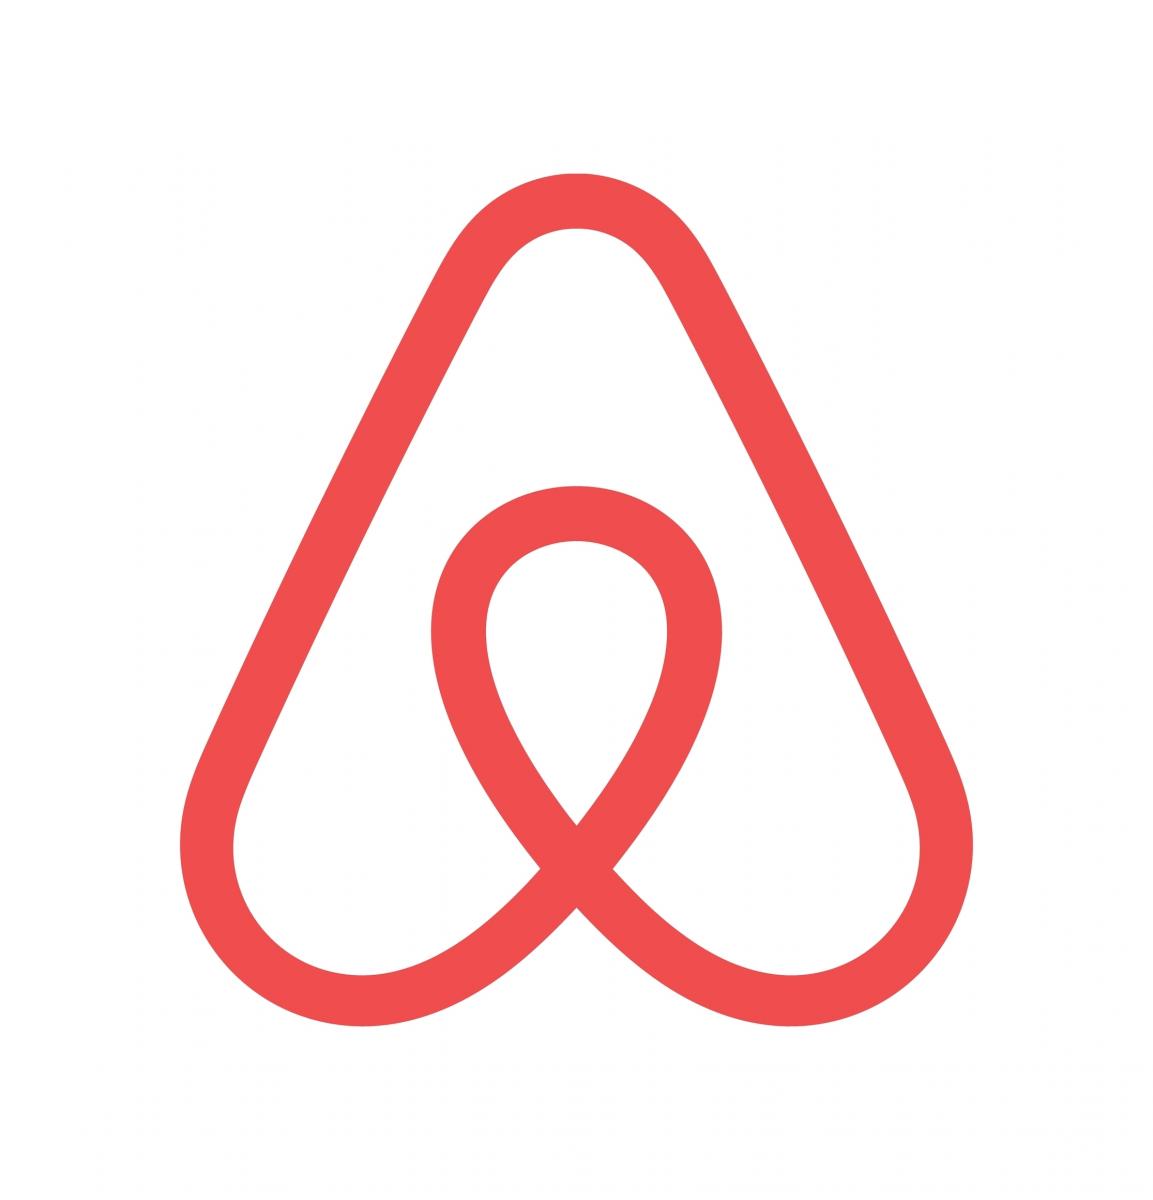 Clampdown needed on Airbnb and other short lets - new demand